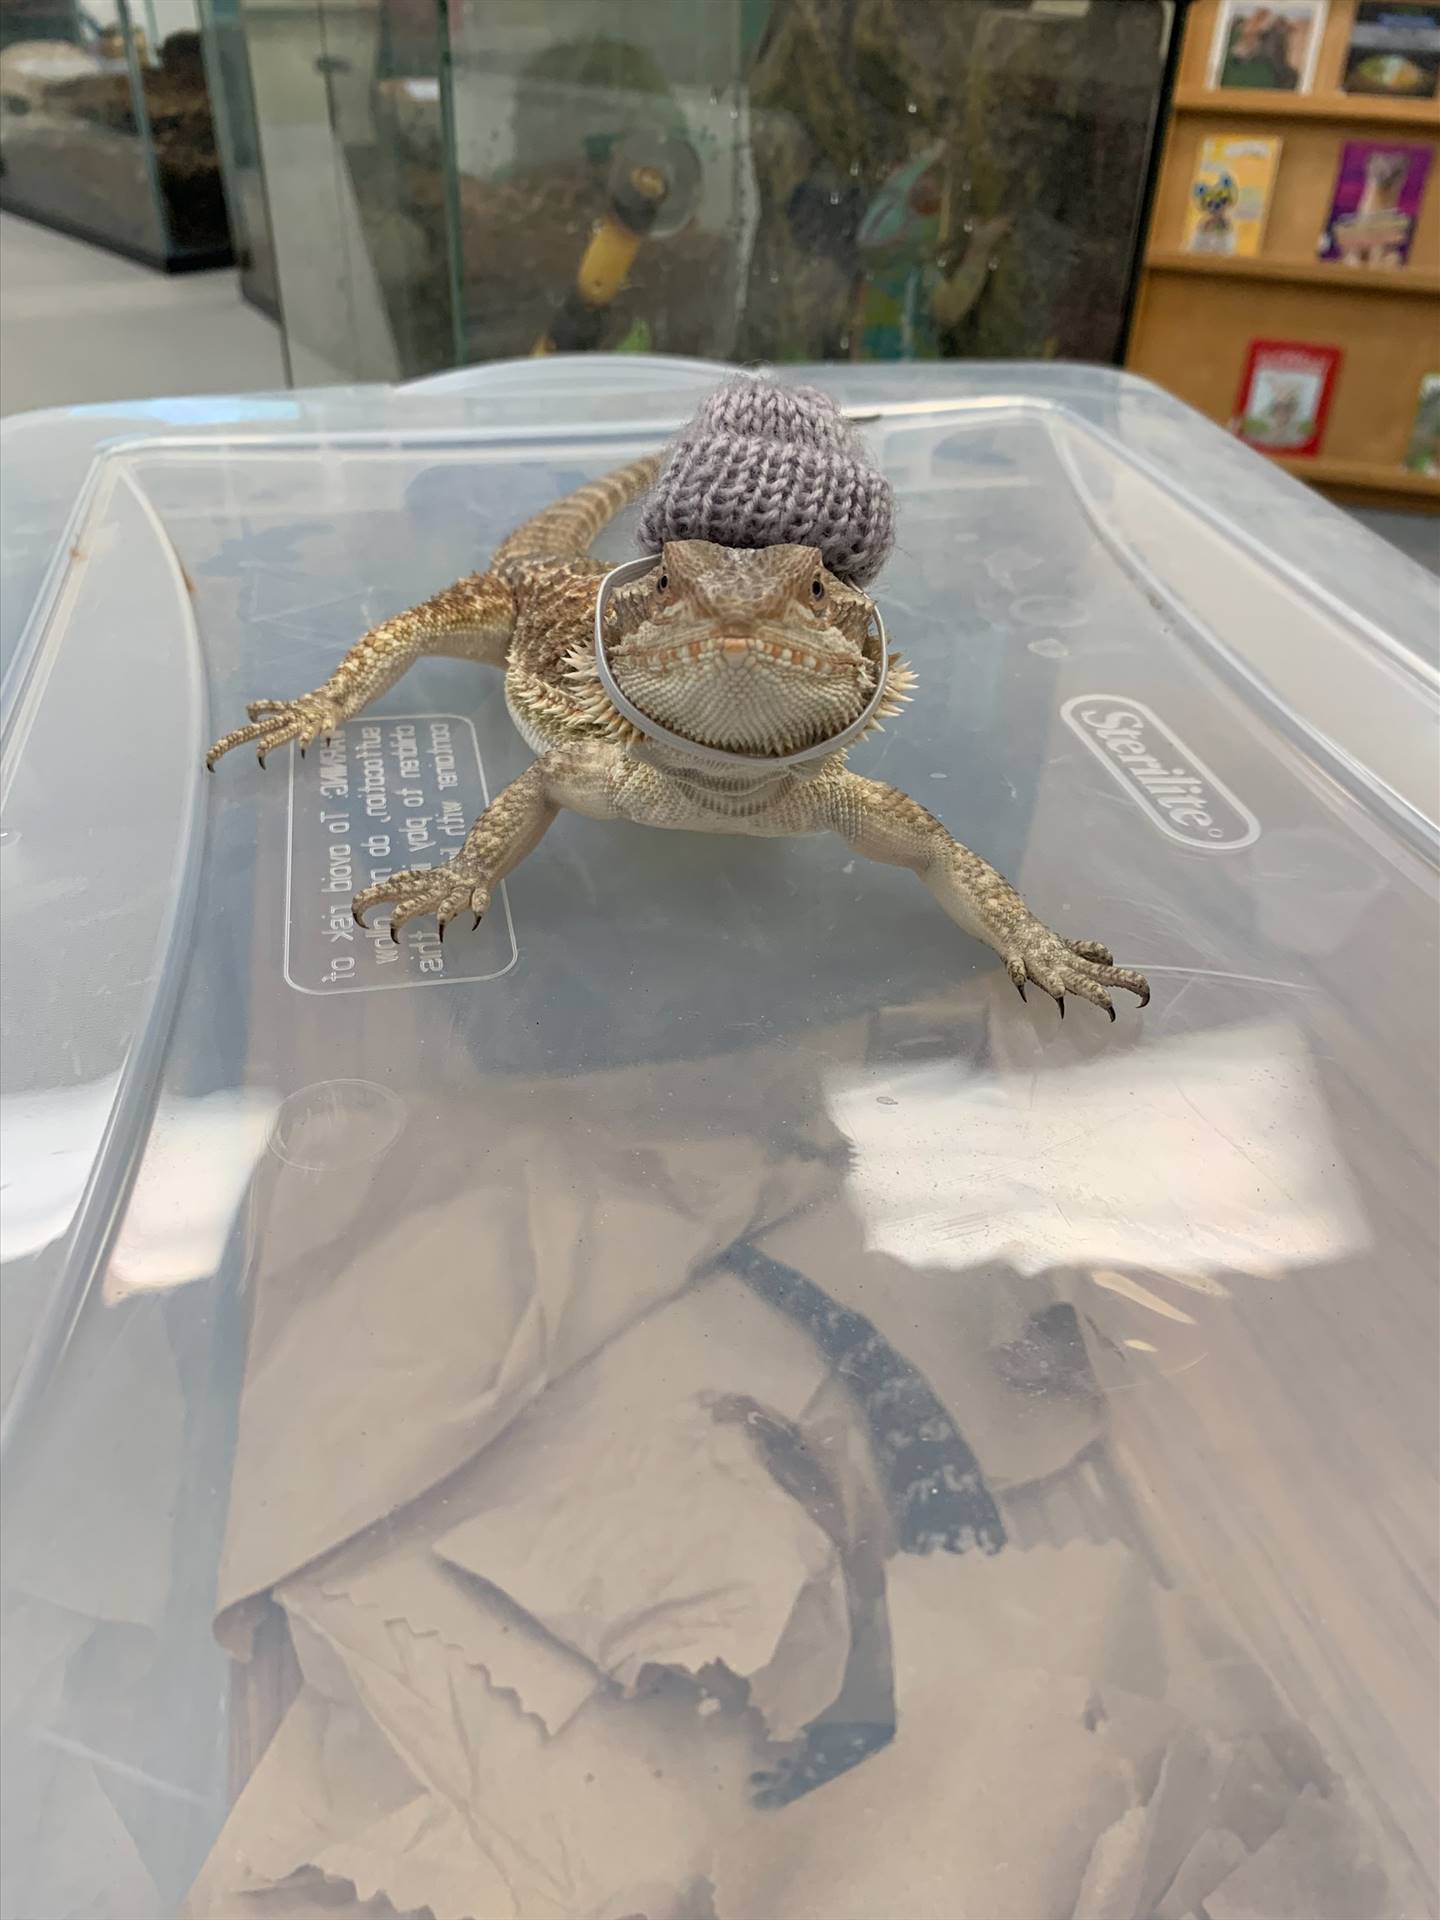 a lizard looks at camera with a tiny knitted hat on its head